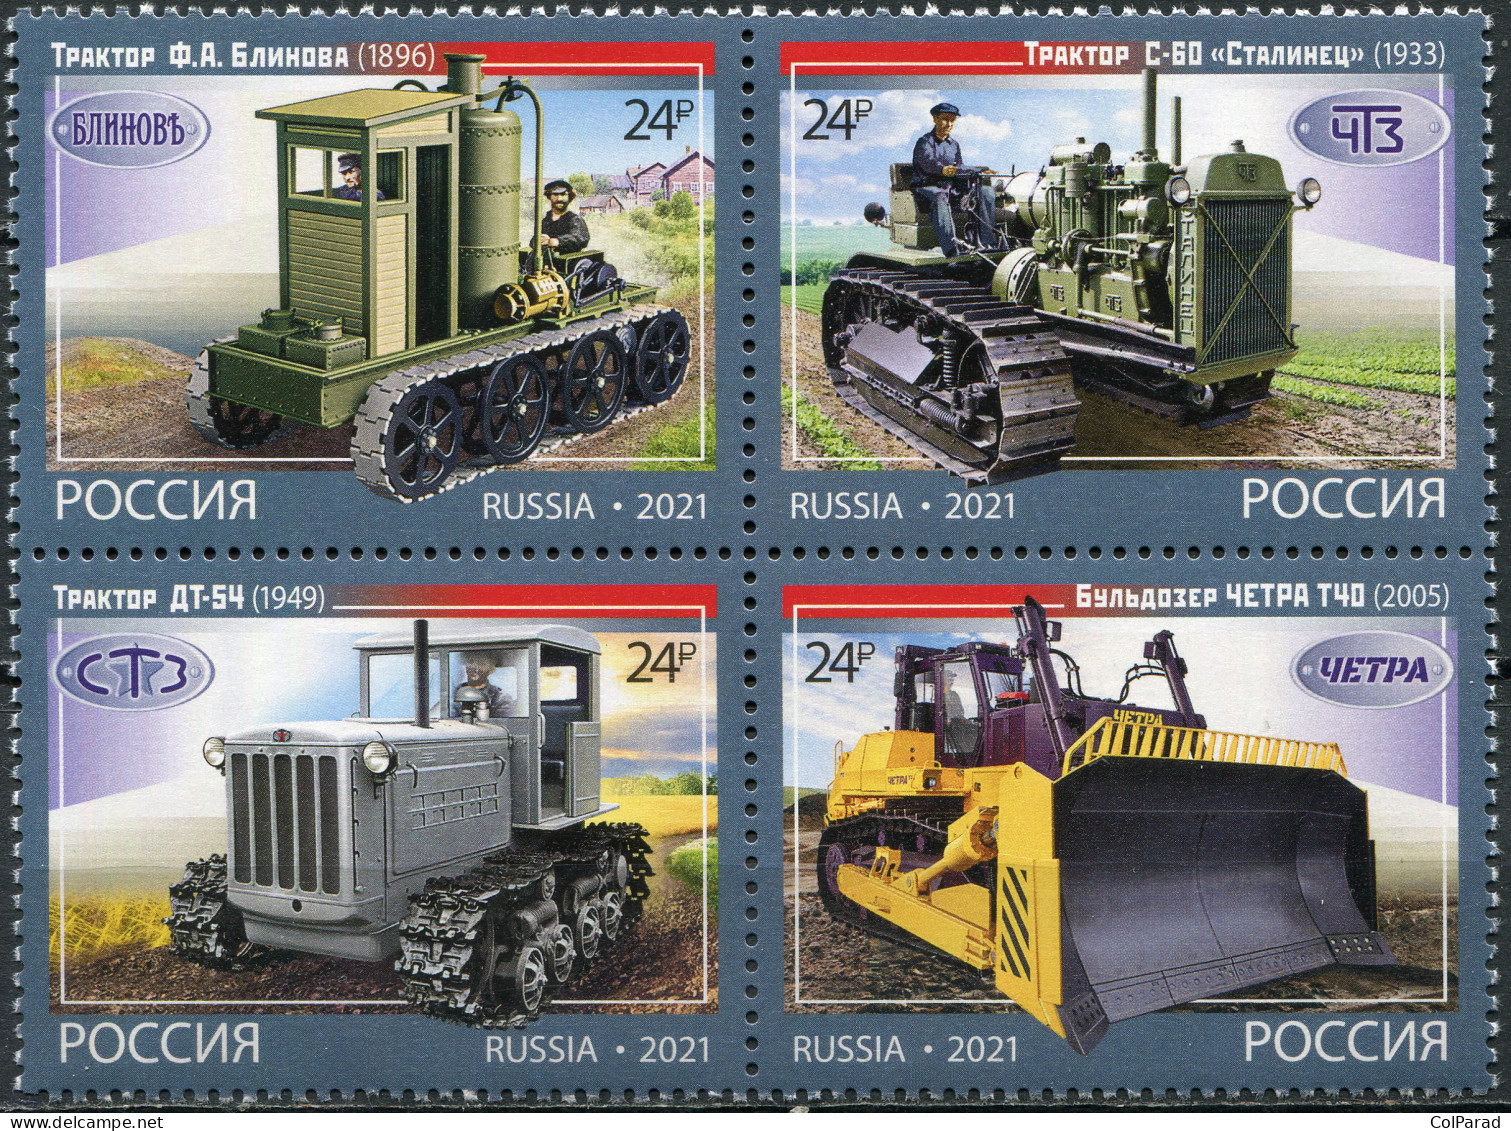 RUSSIA - 2021 - BLOCK OF 4 STAMPS MNH ** - Crawler Tractors - Nuevos